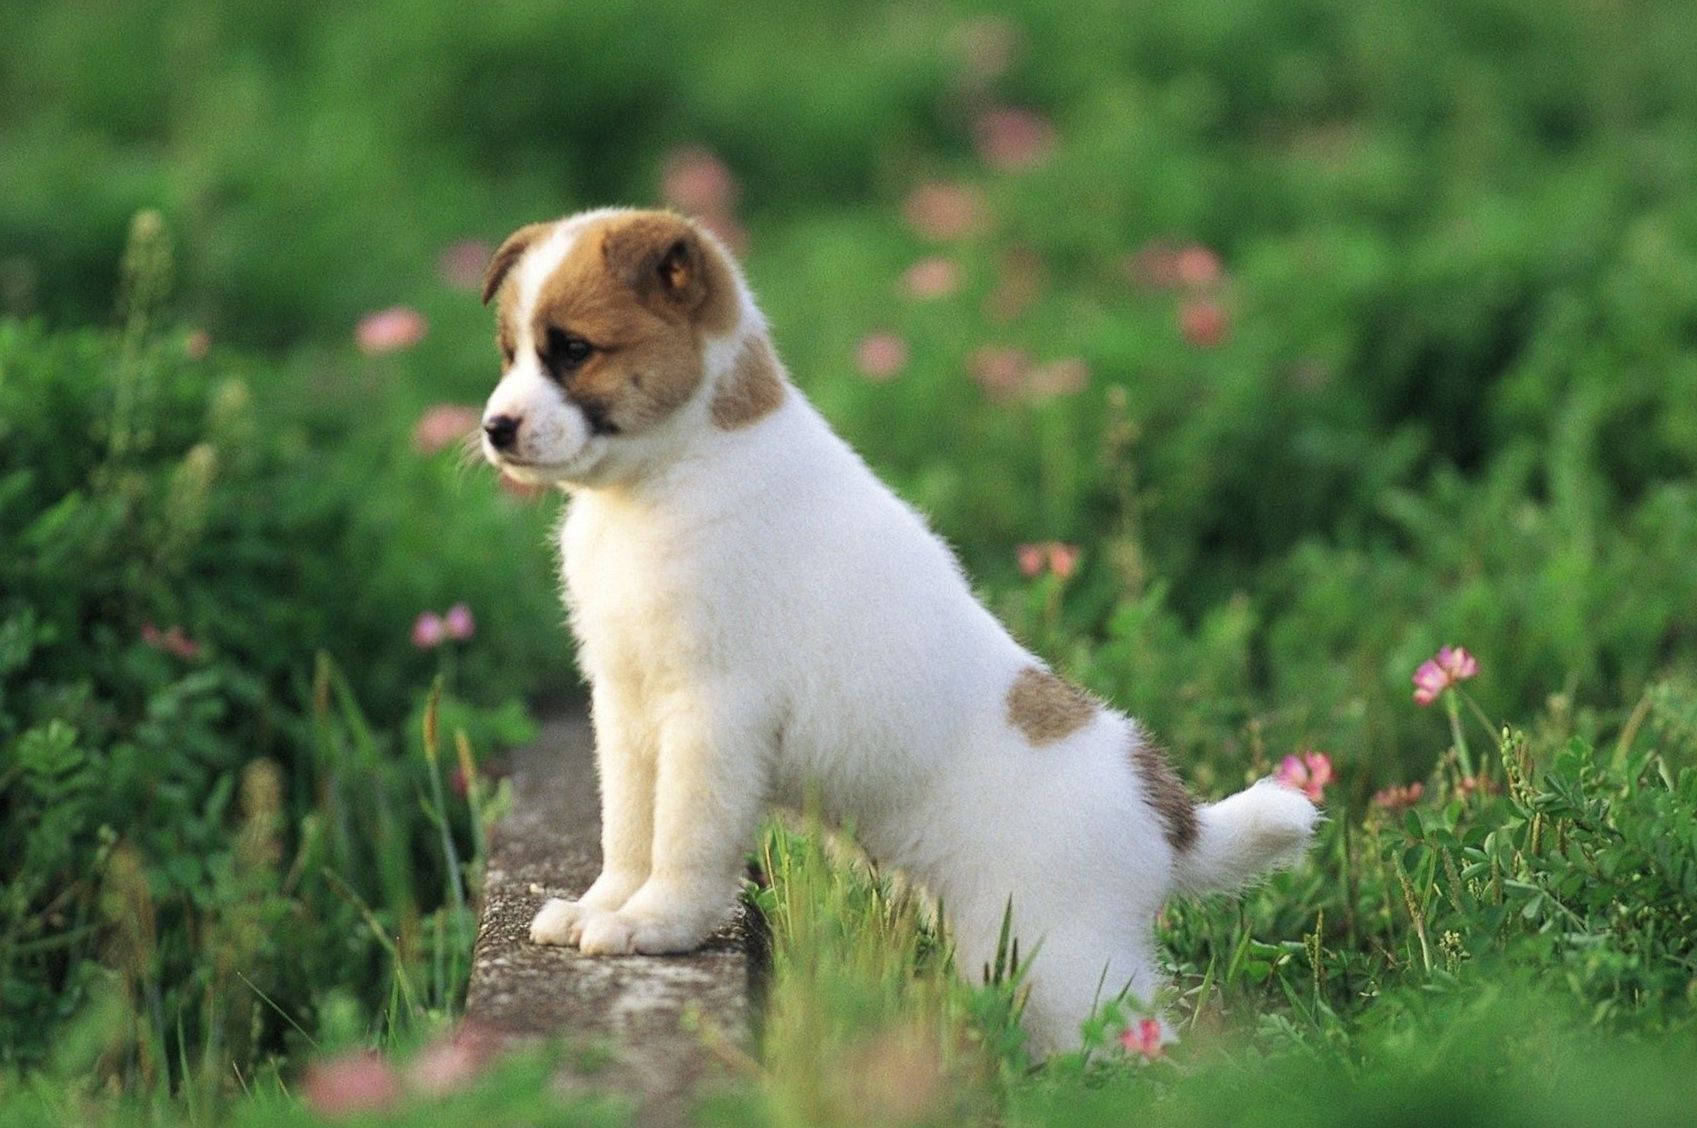 Cute dog wallpaper of puppy on grass with pink flowers